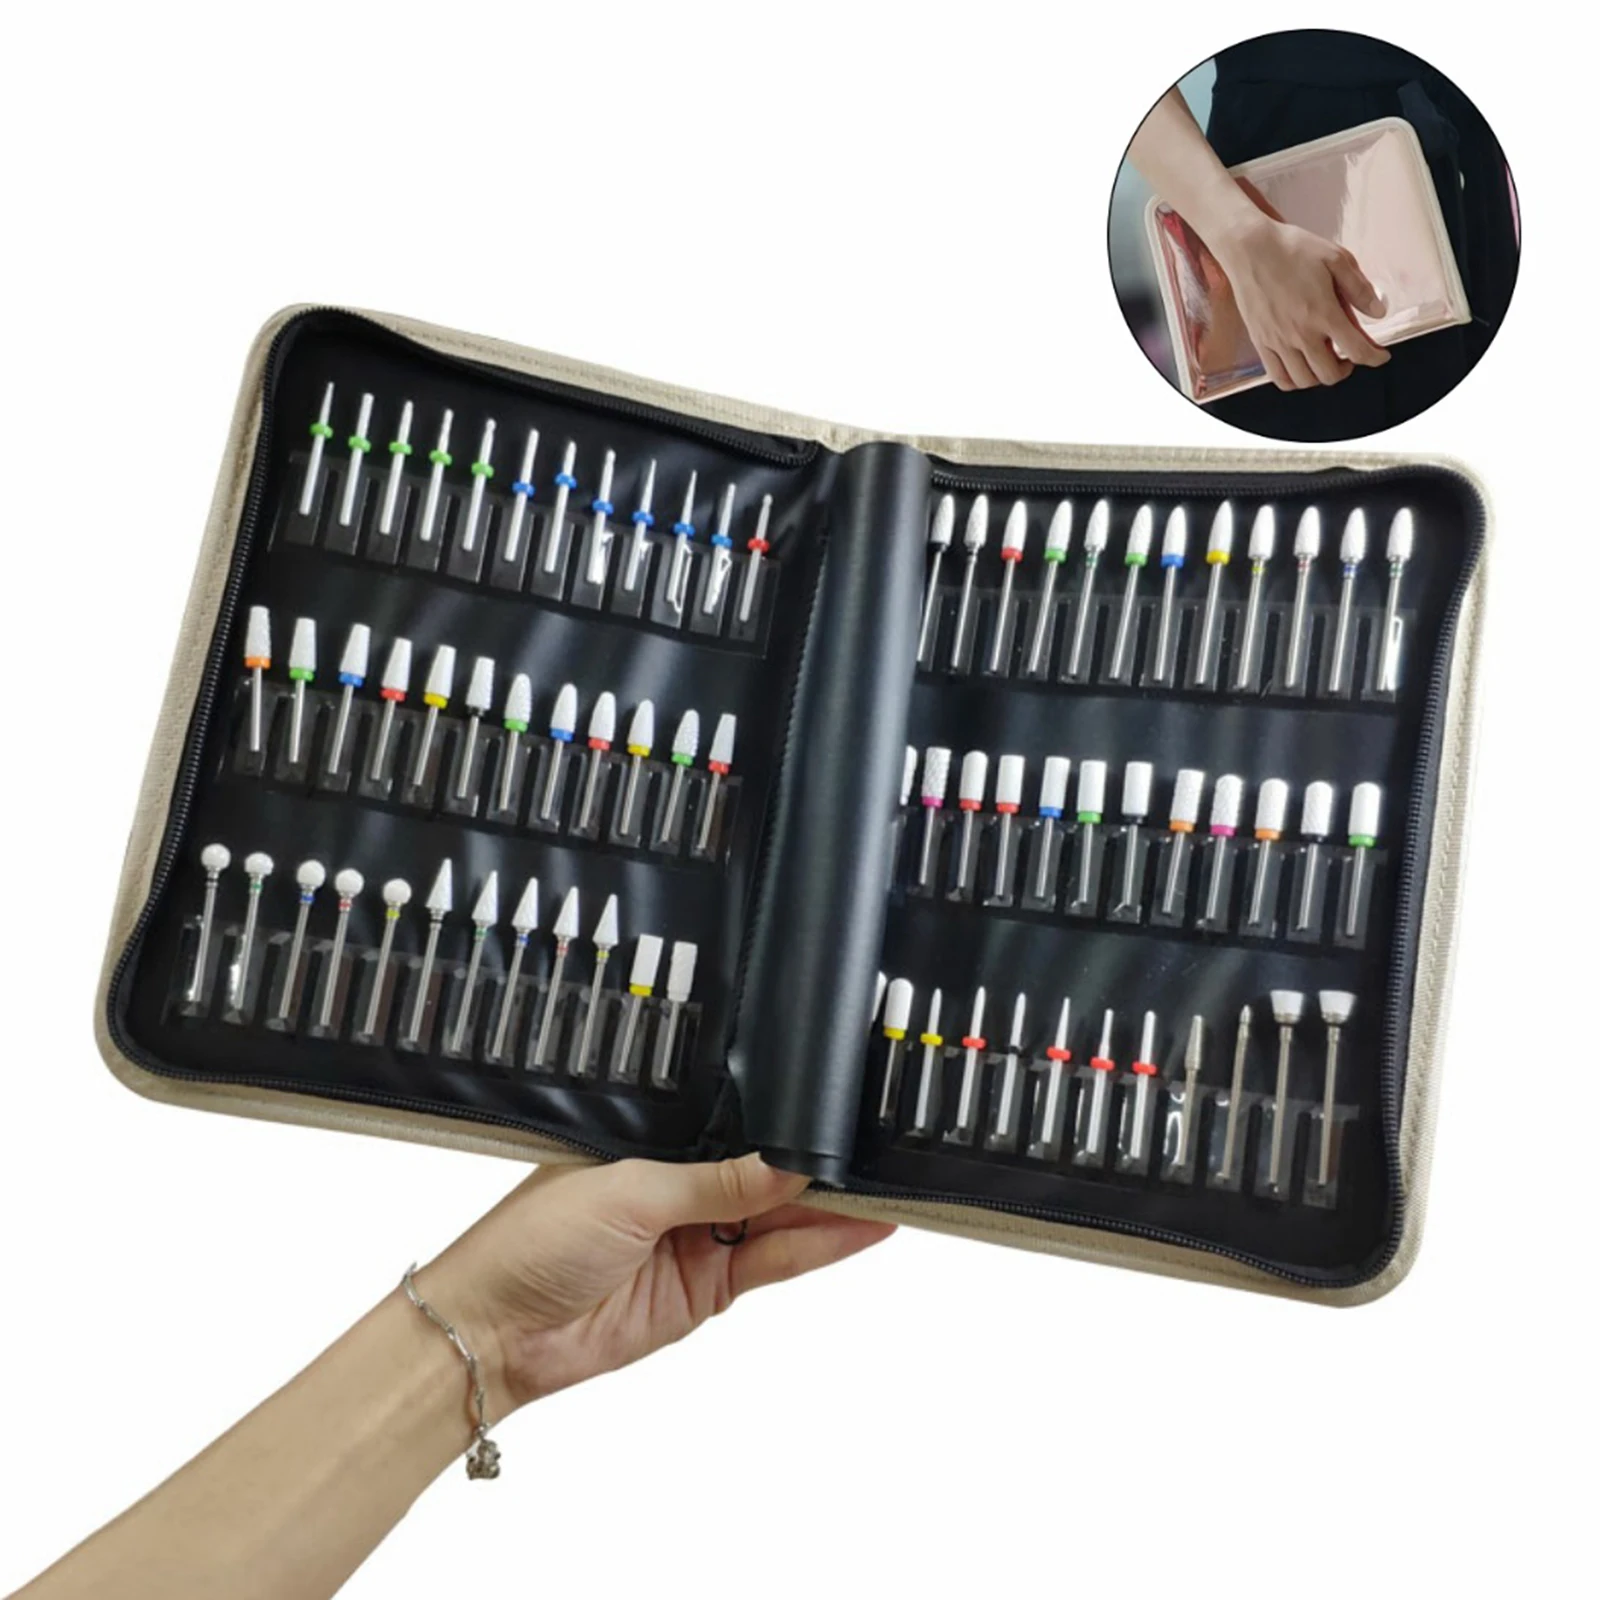 Portable Foldable Manicure Nail Drill Bits Holder Storage Bag Easy Carry